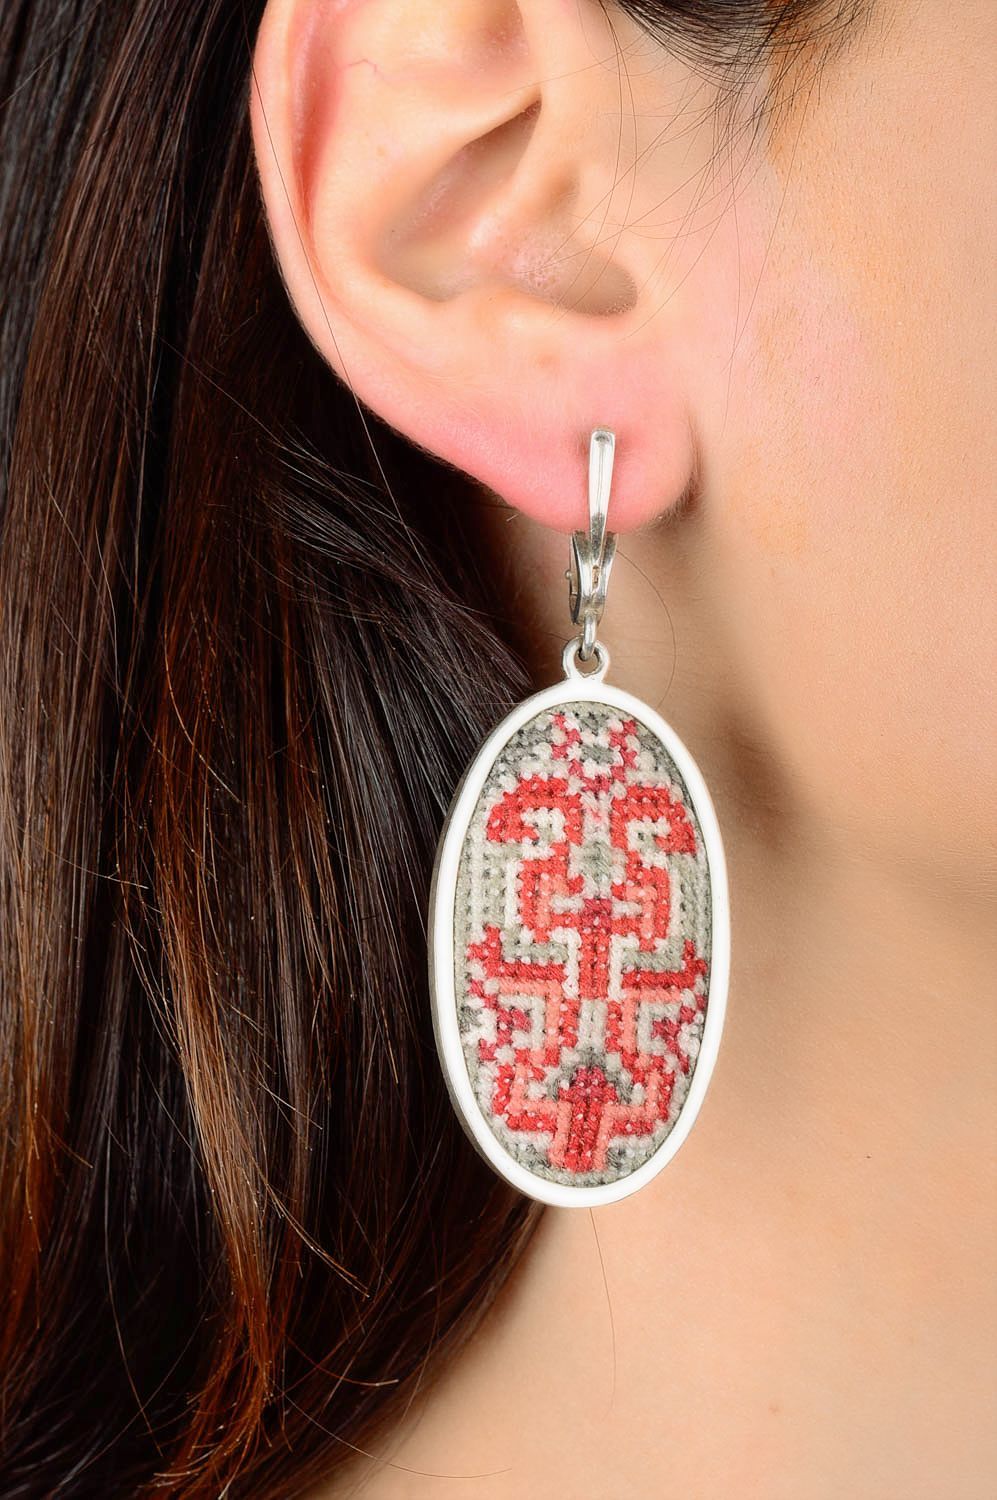 Handmade massive earrings female stylish accessories earrings with embroidery photo 3